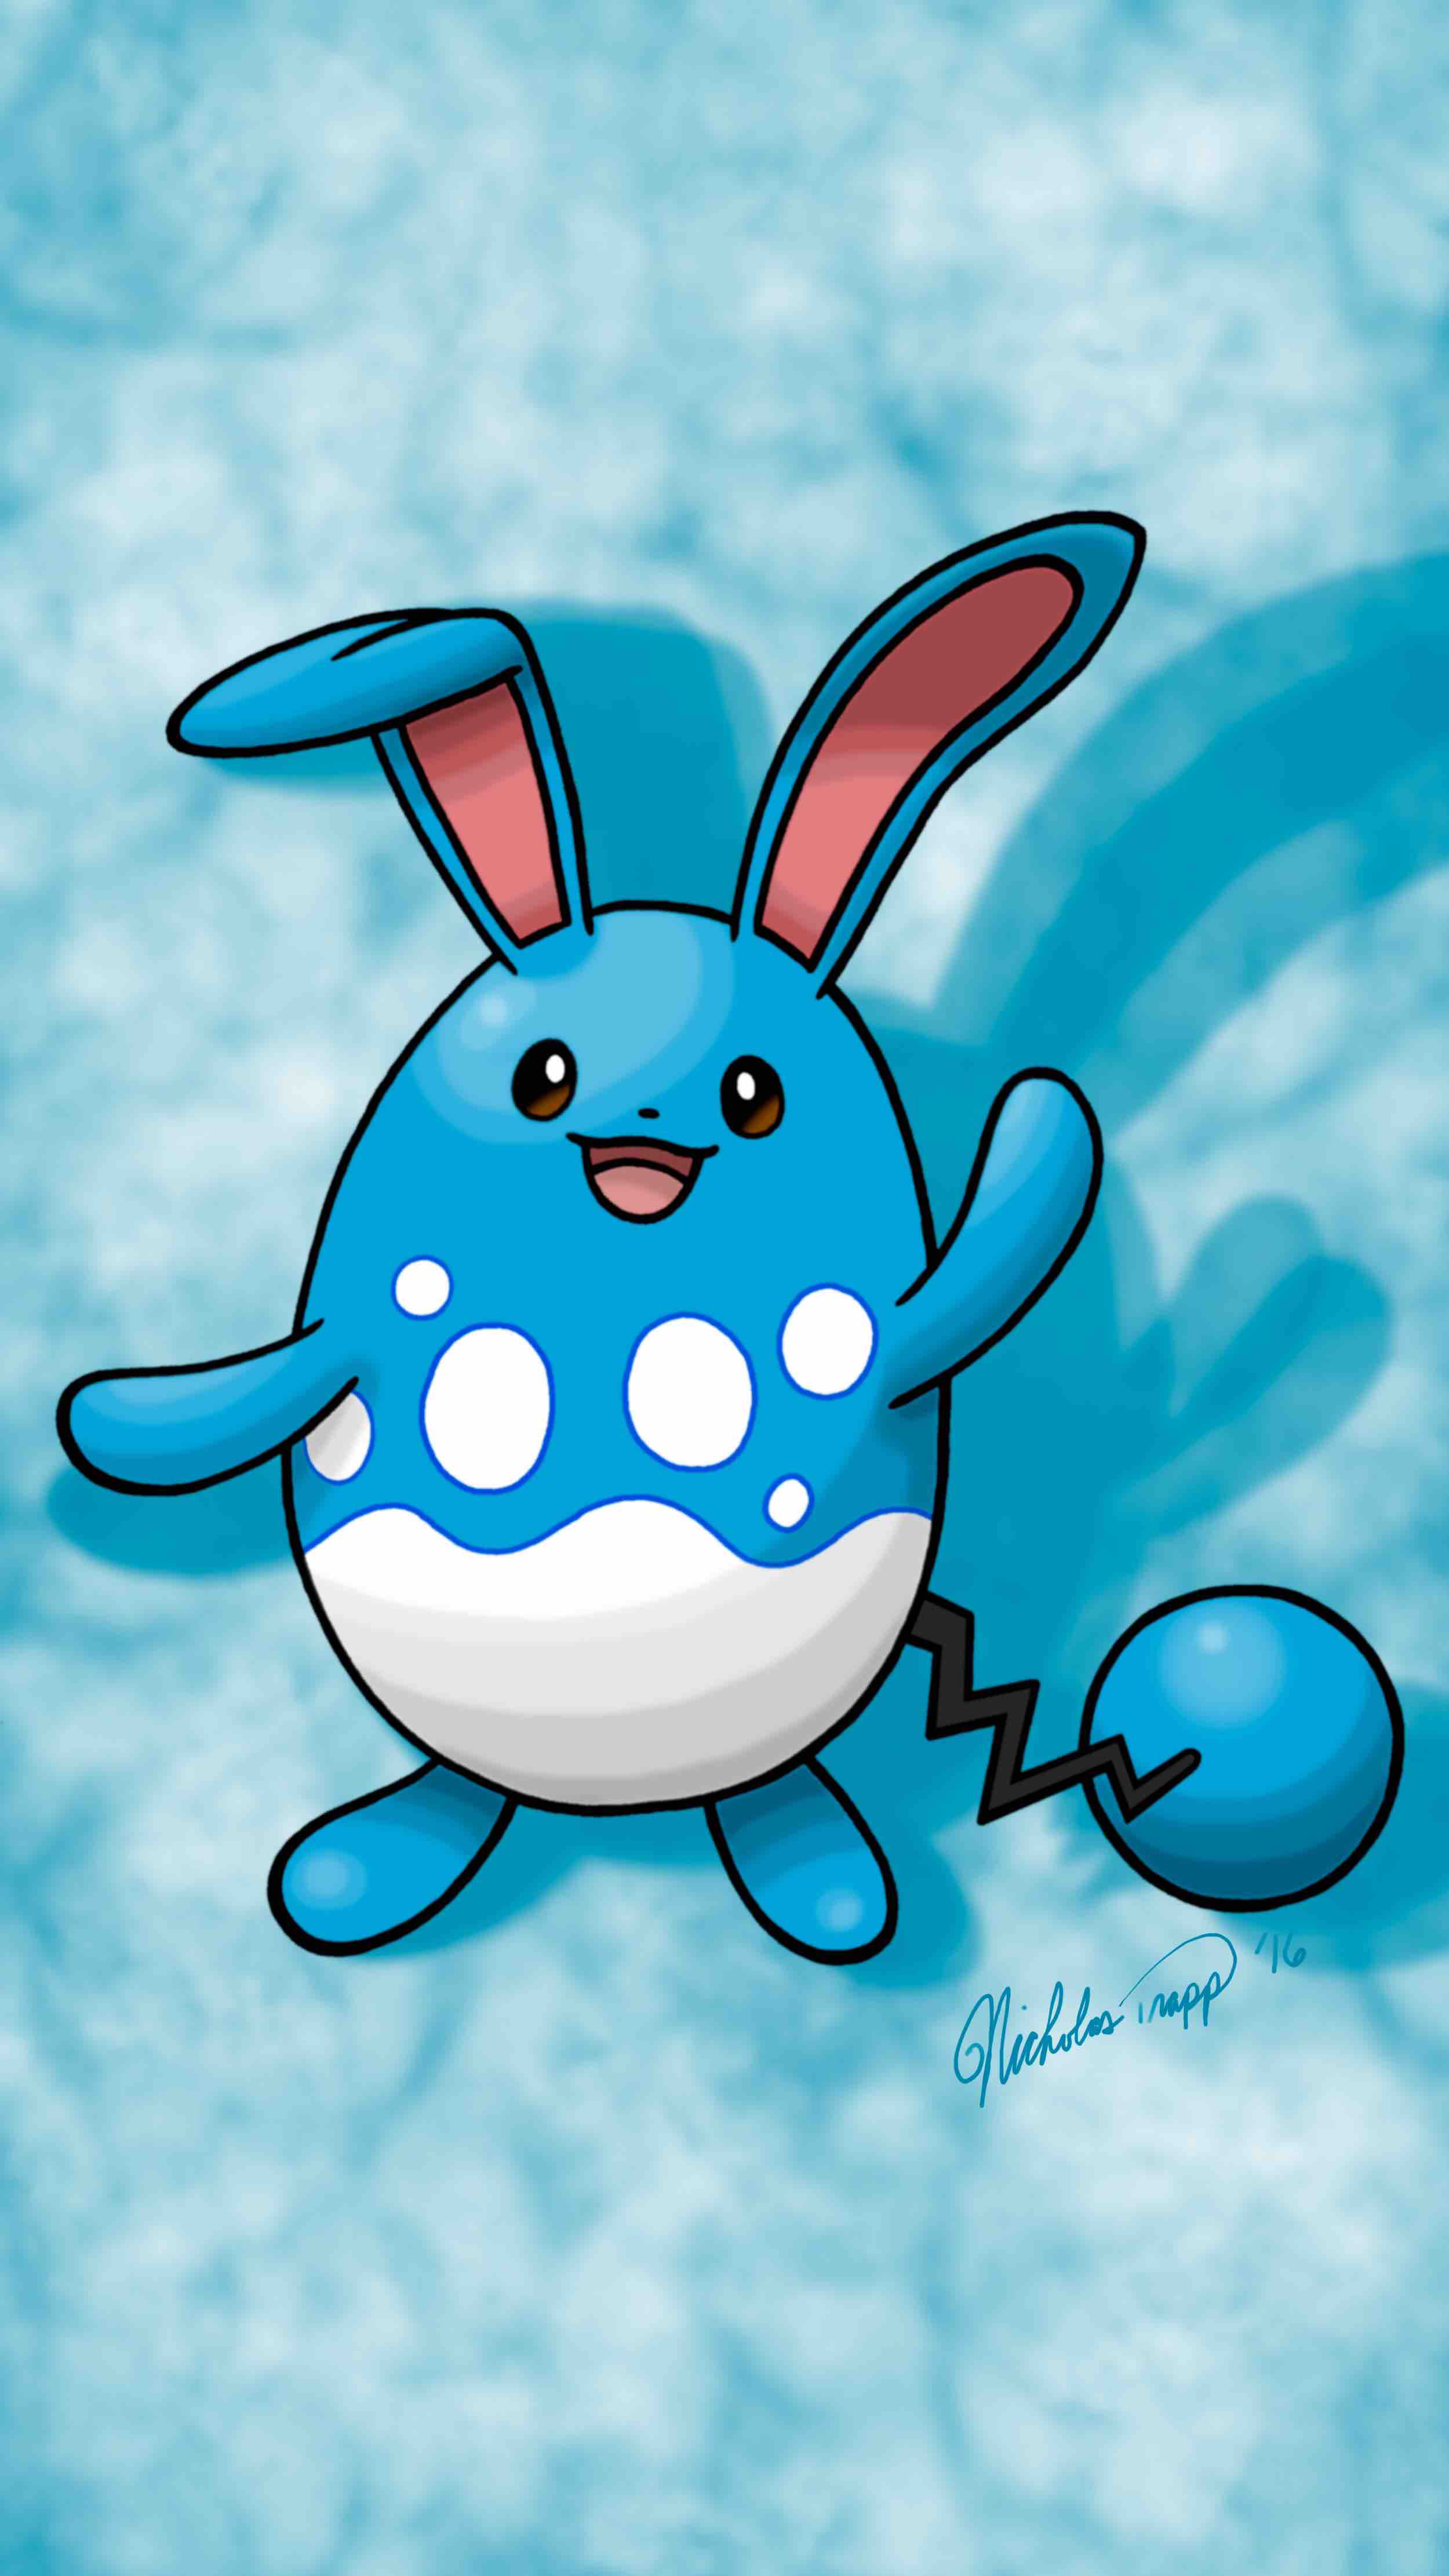 As requested here is the Azumarill Wallpaper. Pokémon